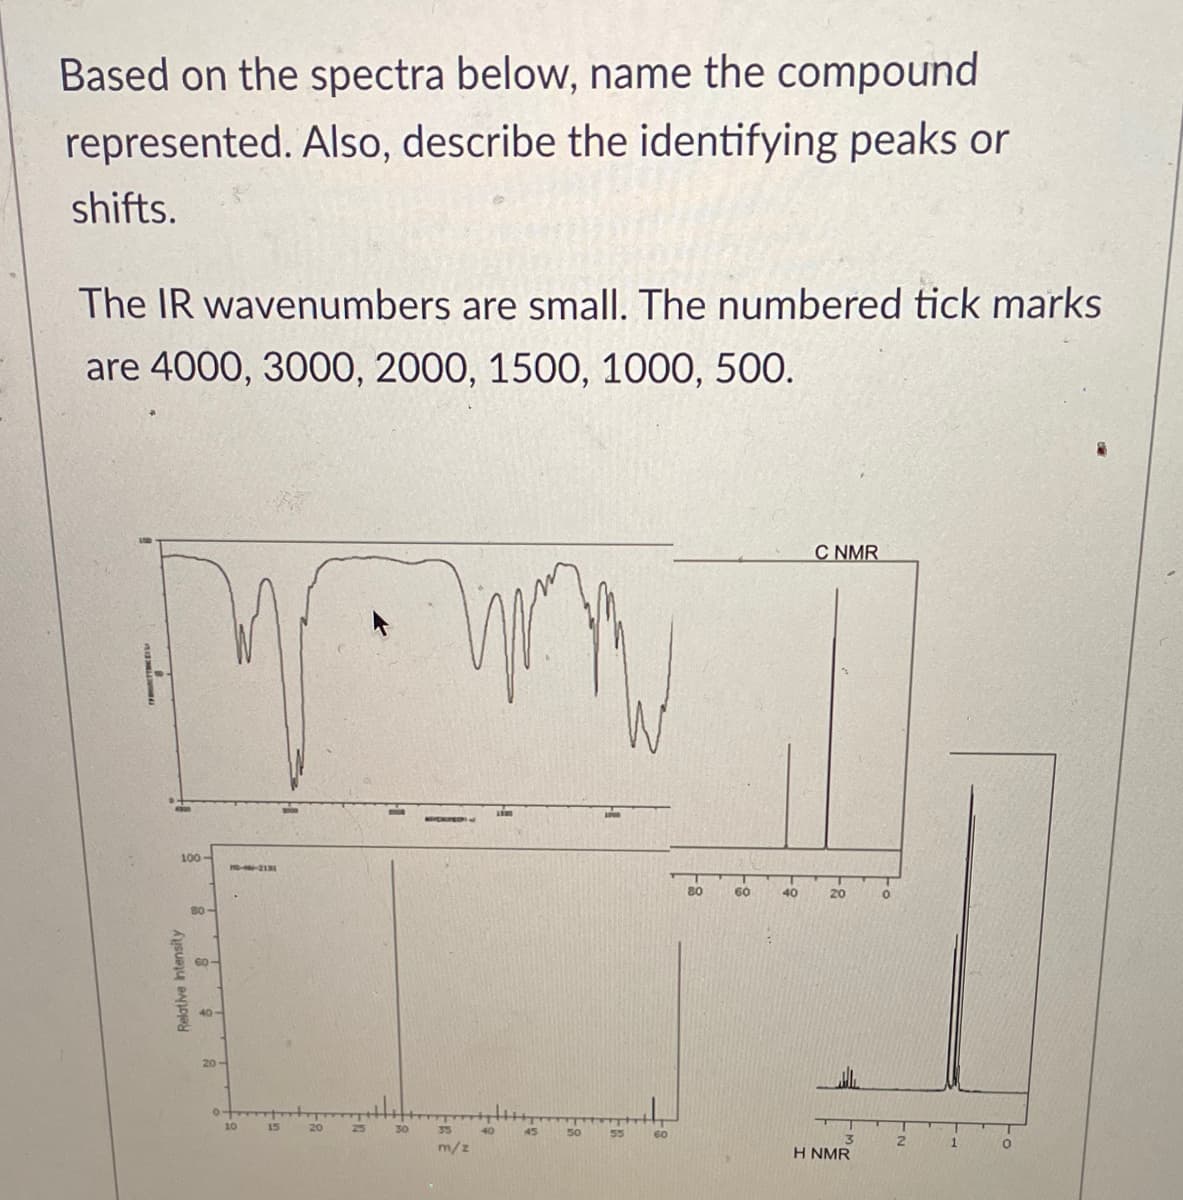 Based on the spectra below, name the compound
represented. Also, describe the identifying peaks or
shifts.
The IR wavenumbers are small. The numbered tick marks
are 4000, 3000, 2000, 1500, 1000, 500.
C NMR
100-
80
60
40
20
B0-
60-
40-
20
10
15
20
35
55
60
m/z
H NMR
Relative ntensity
